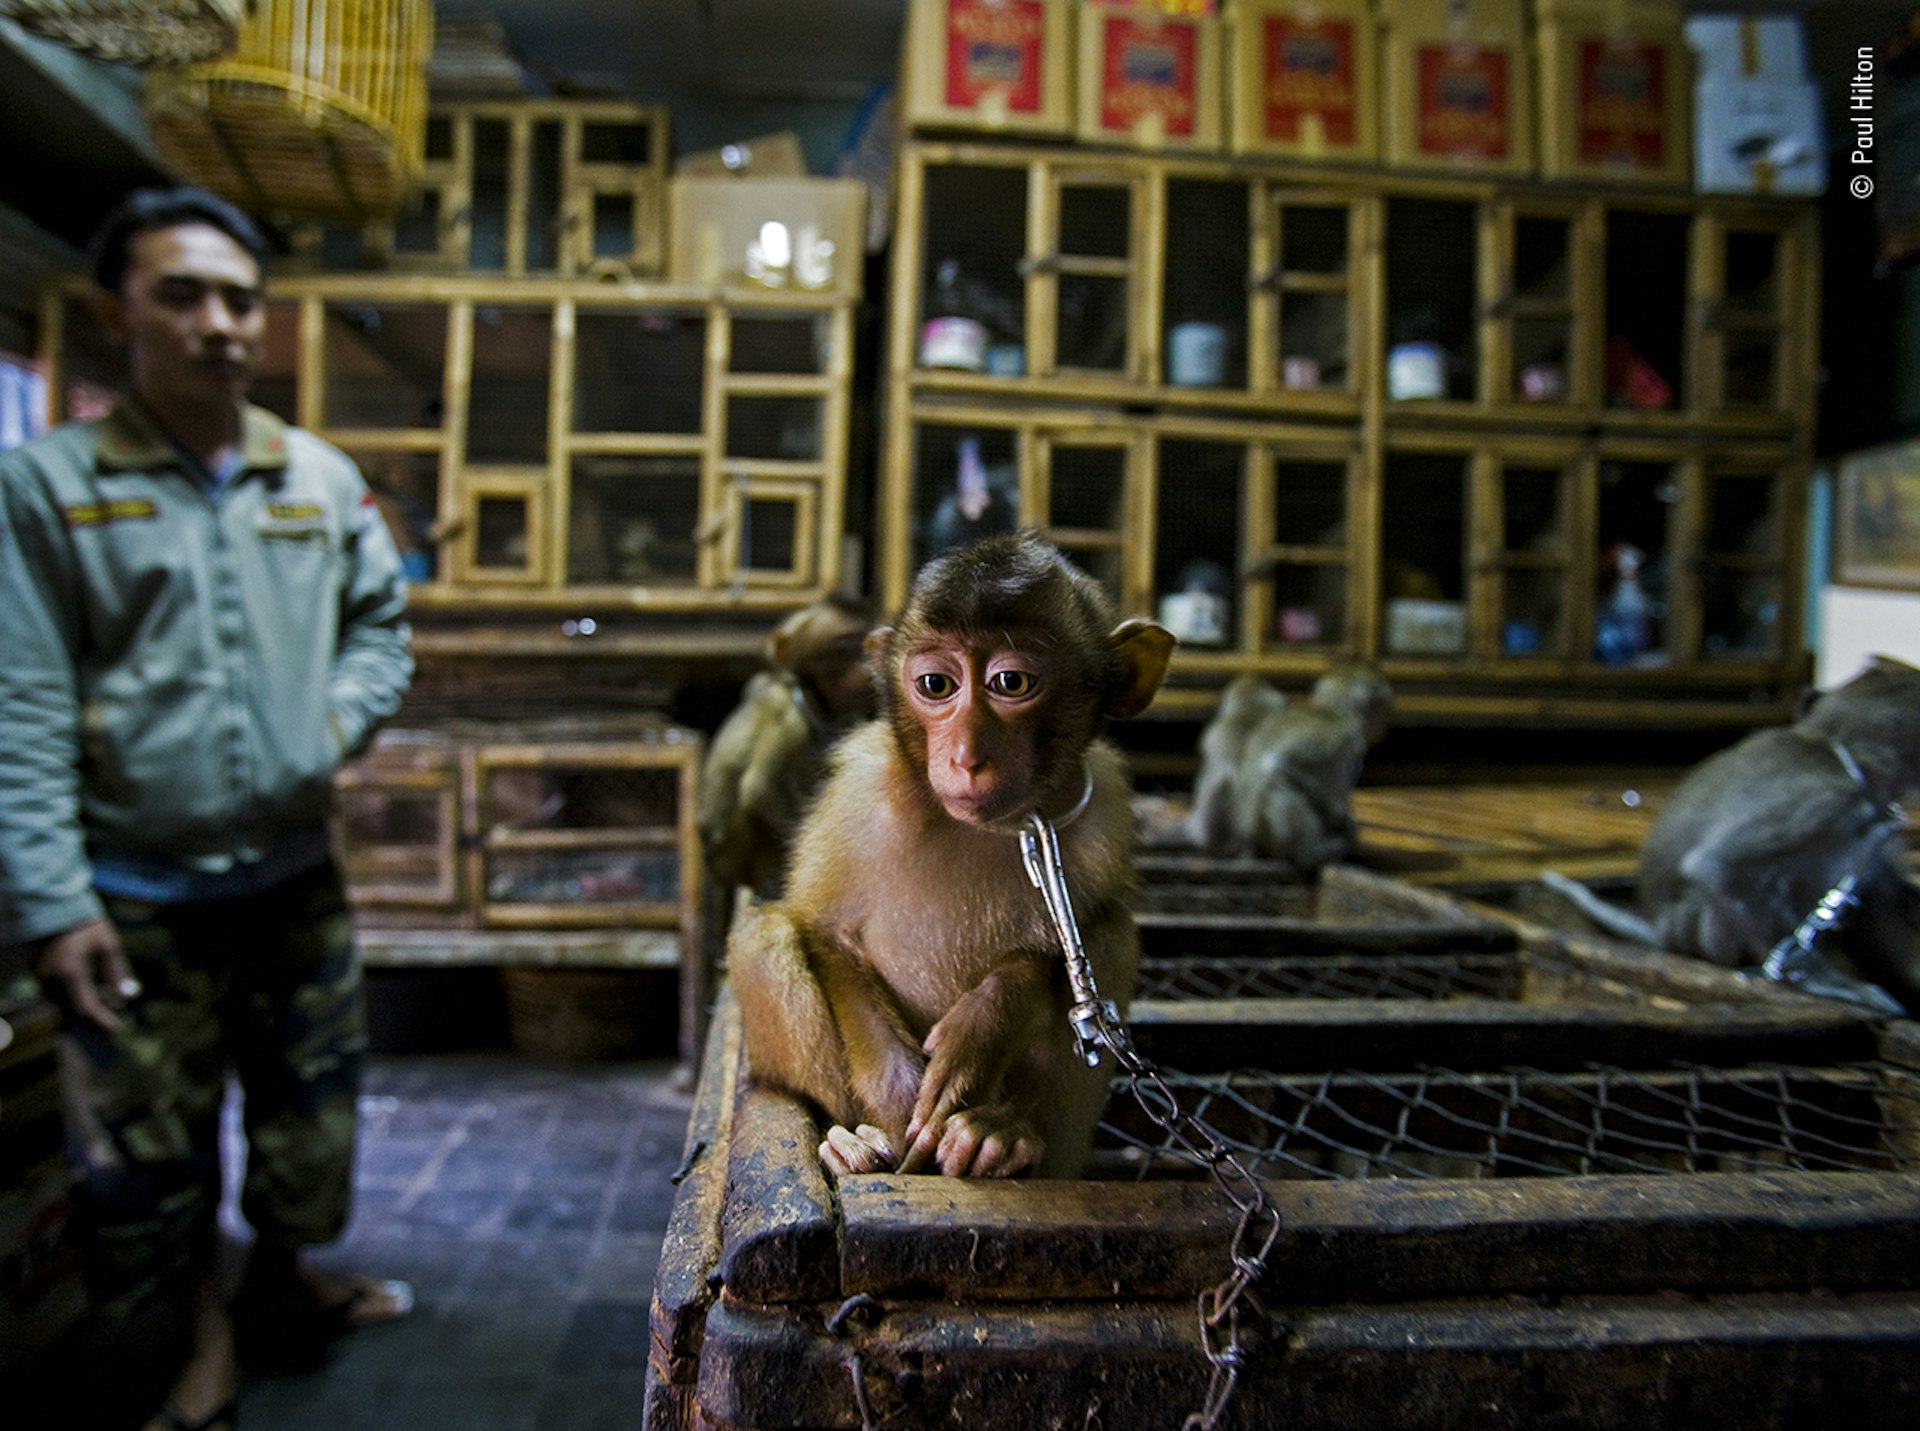 A chained macaque sitting on a wwoden box with other macaques in the picture